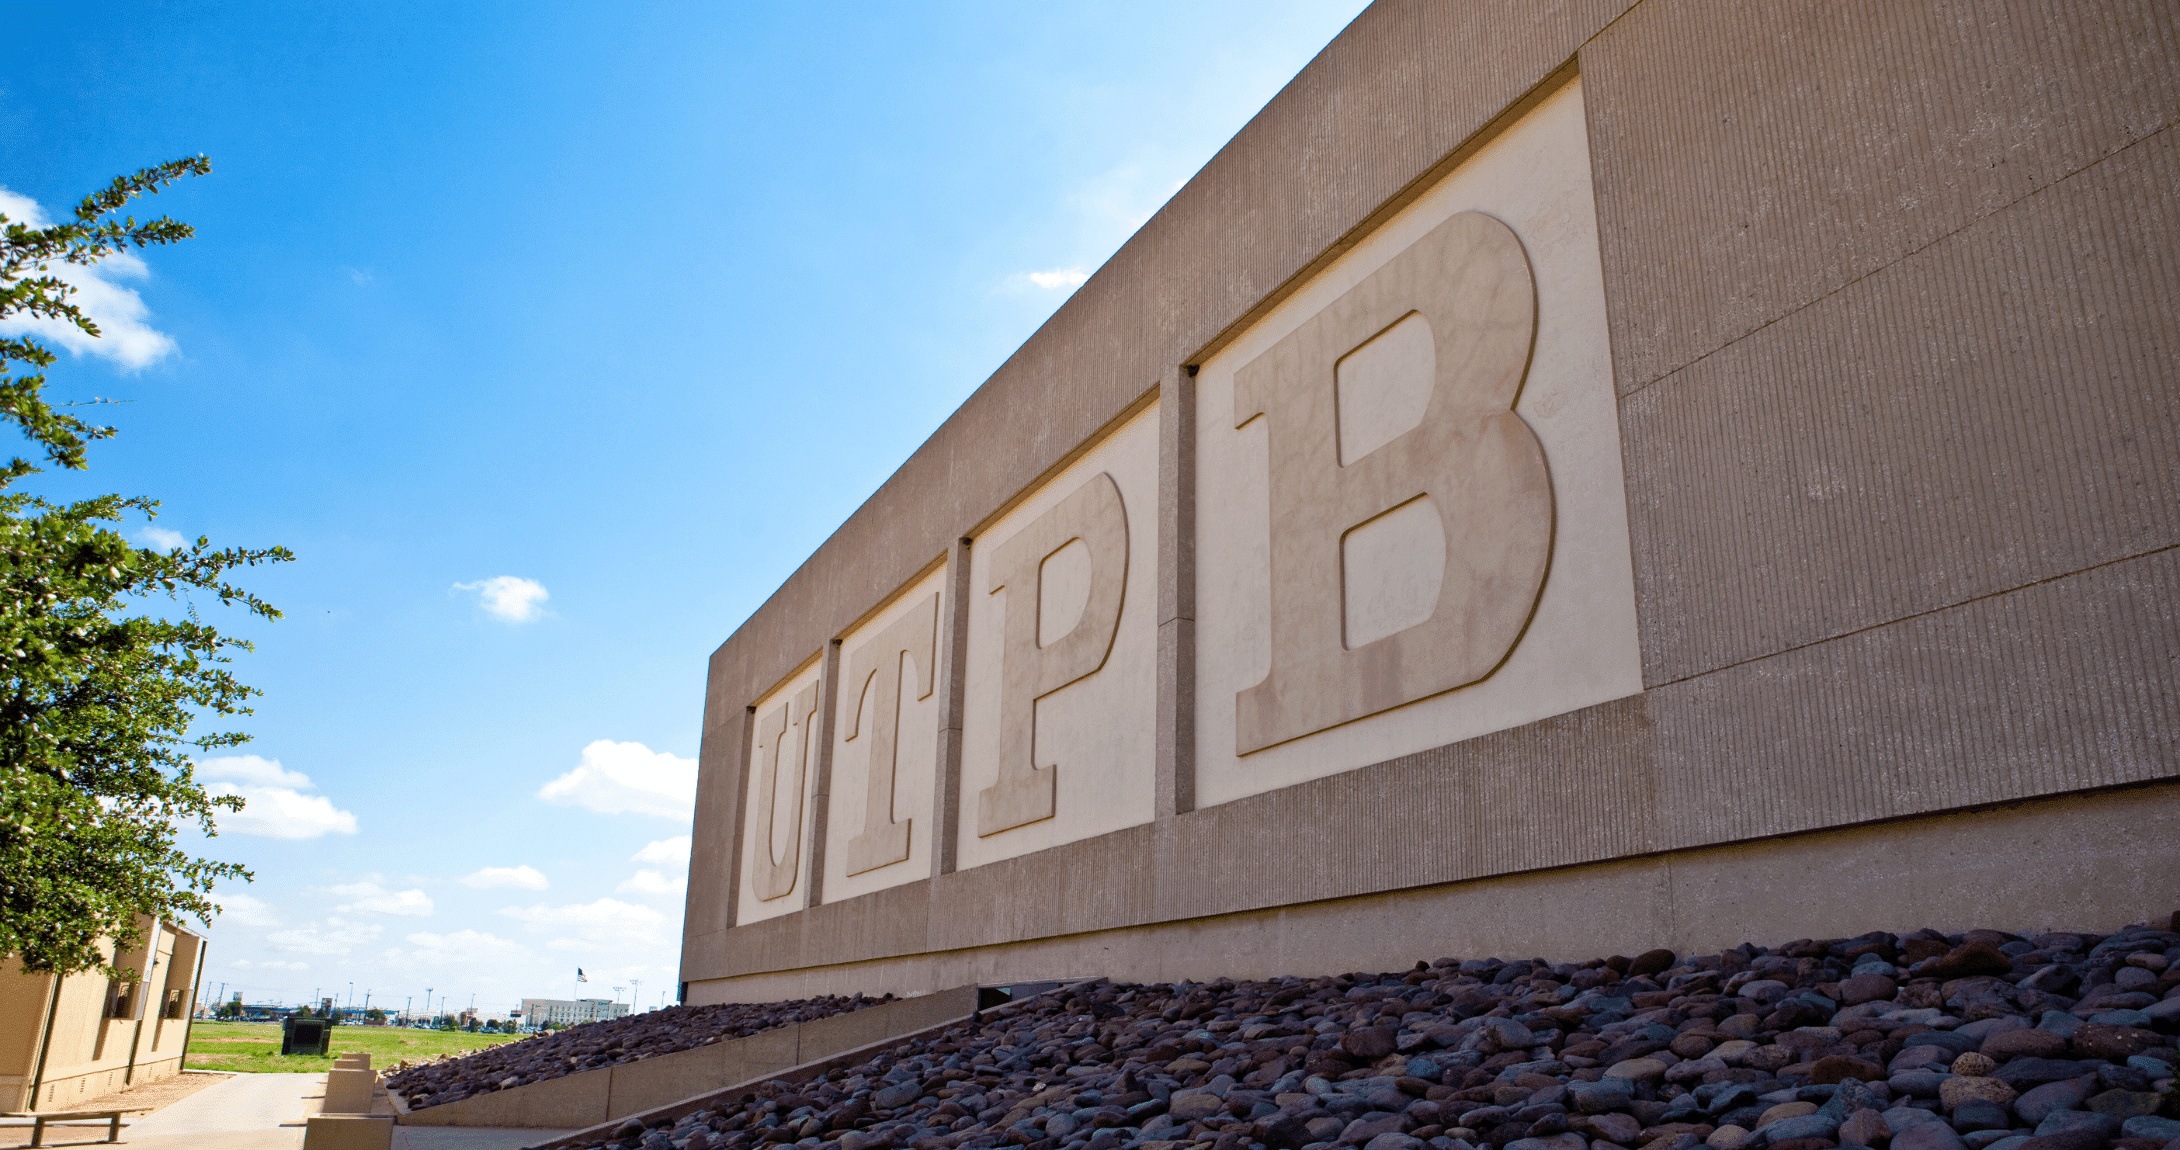 UTPB letters on the side of a building